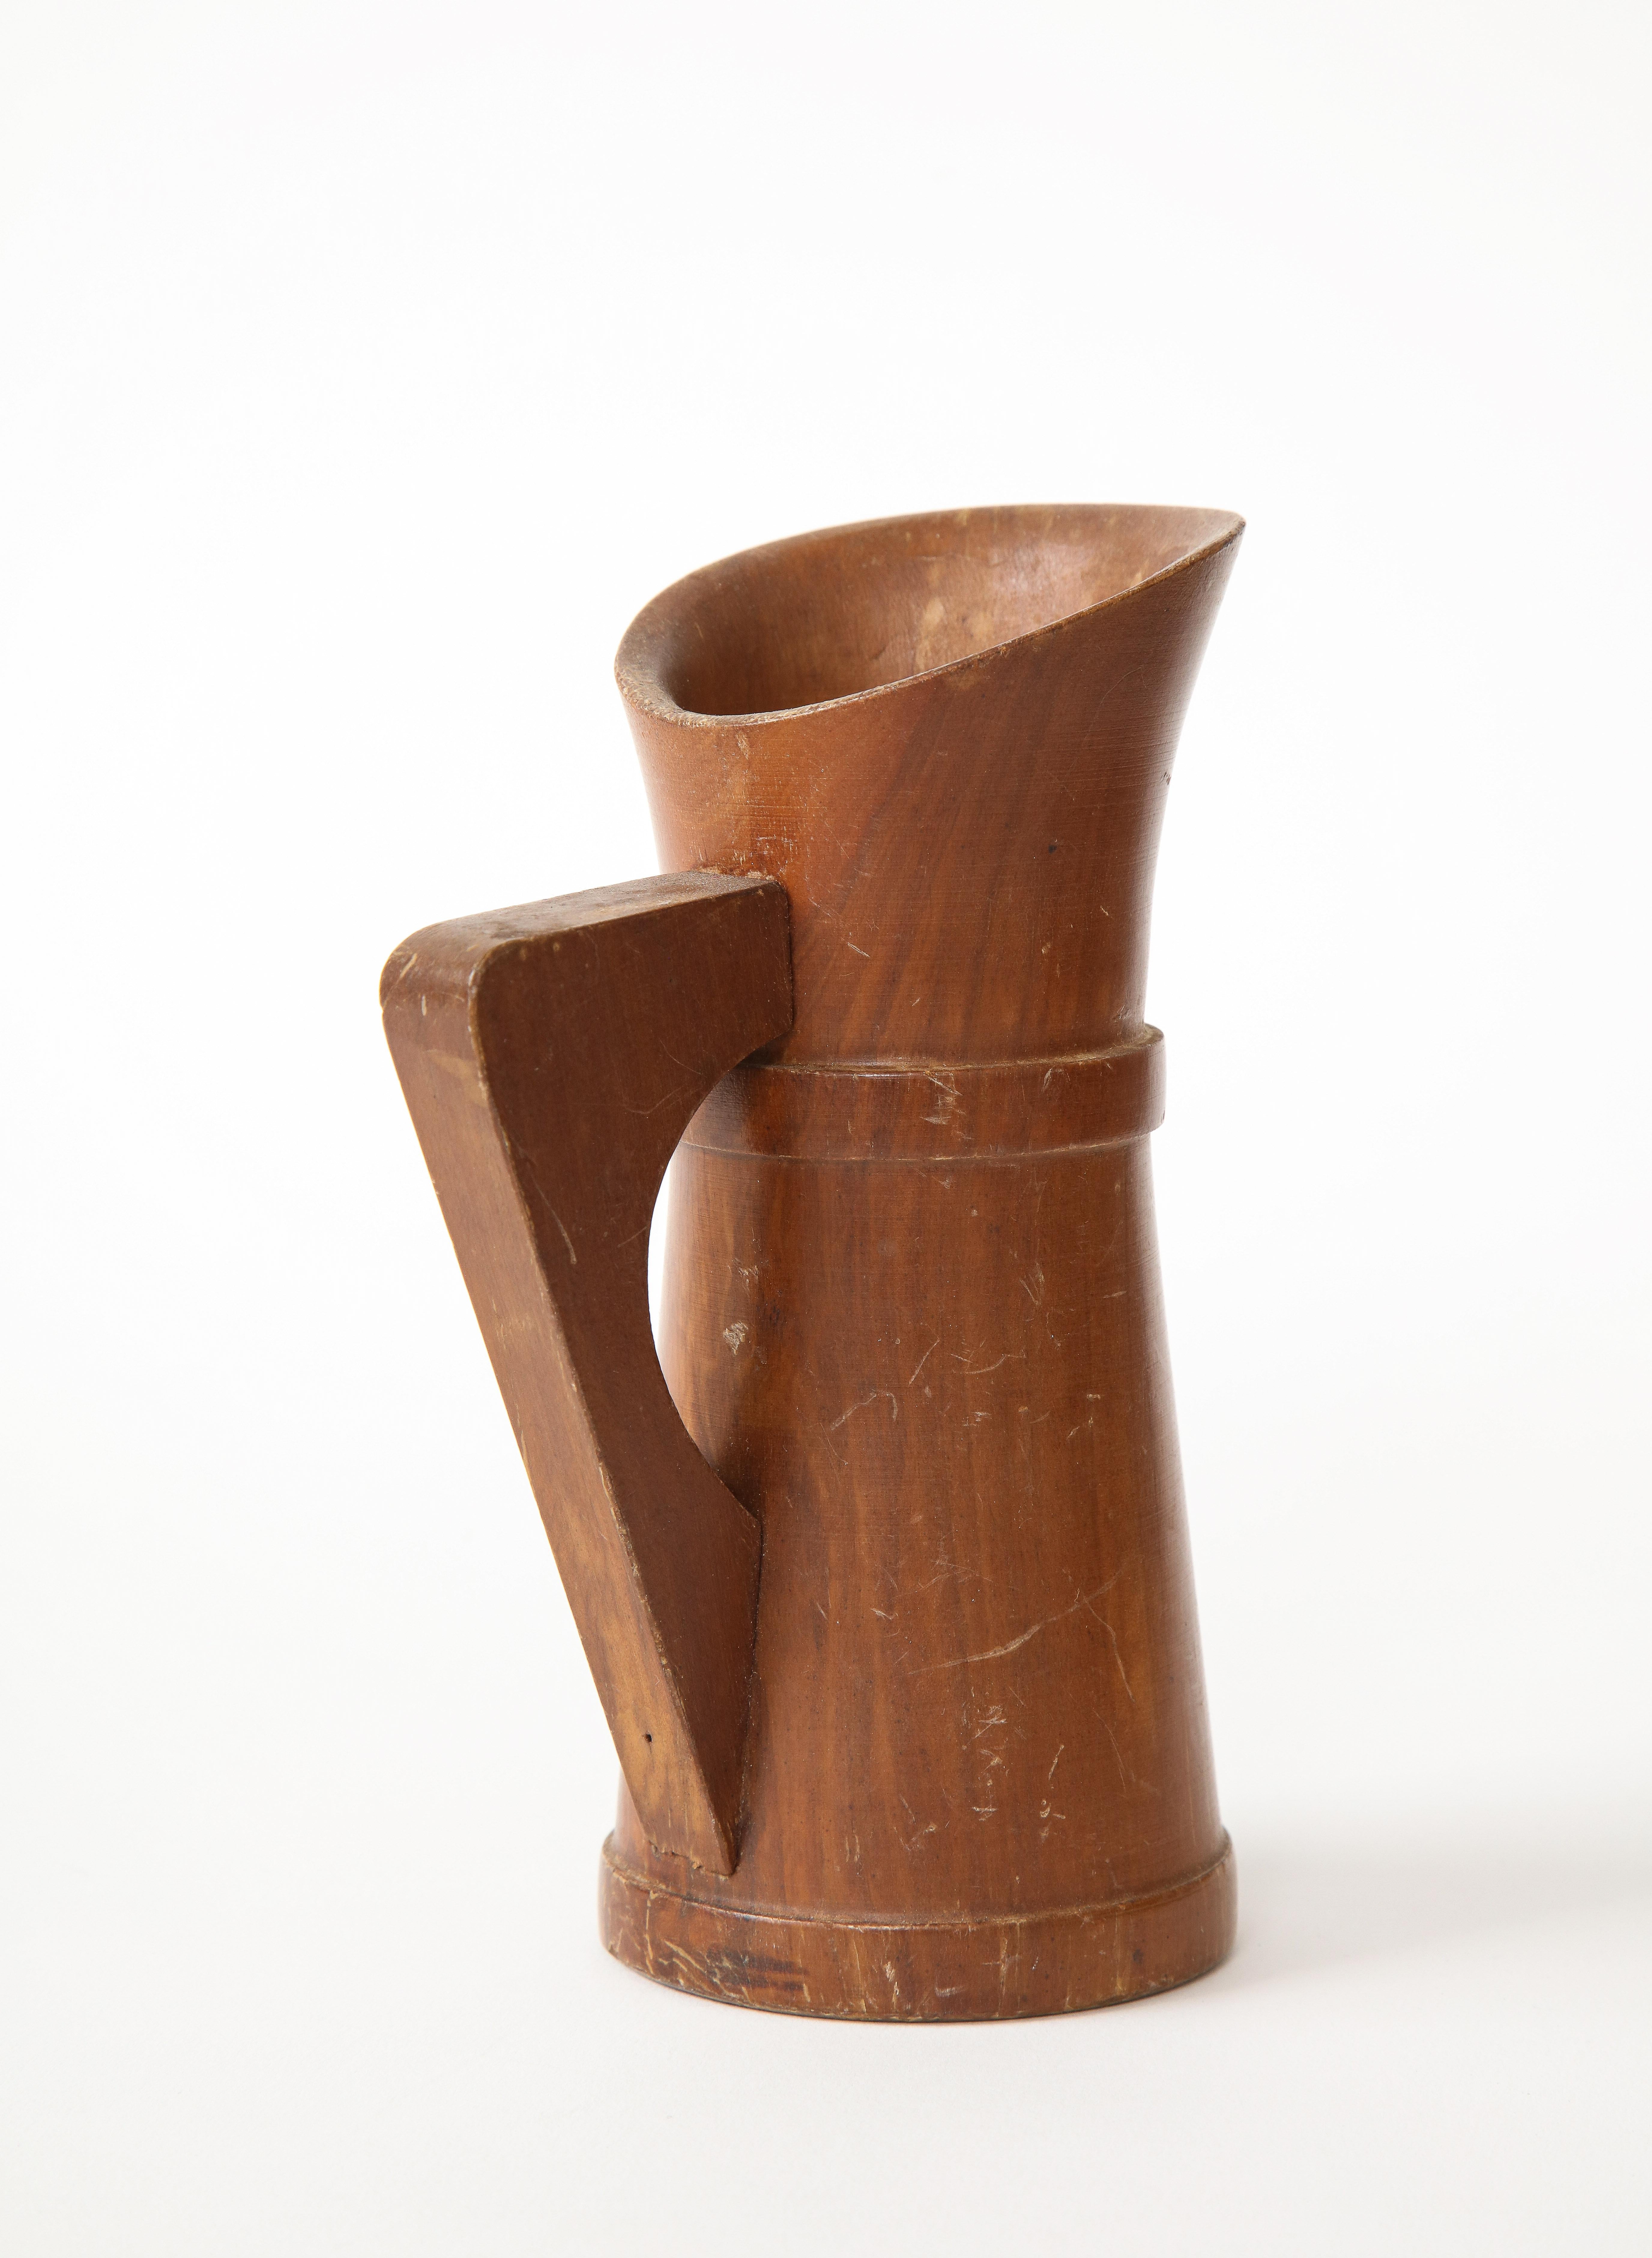 Mid-Century Modern Small Mid-Century Vintage Wooden Pitcher, France, c. 1950s For Sale